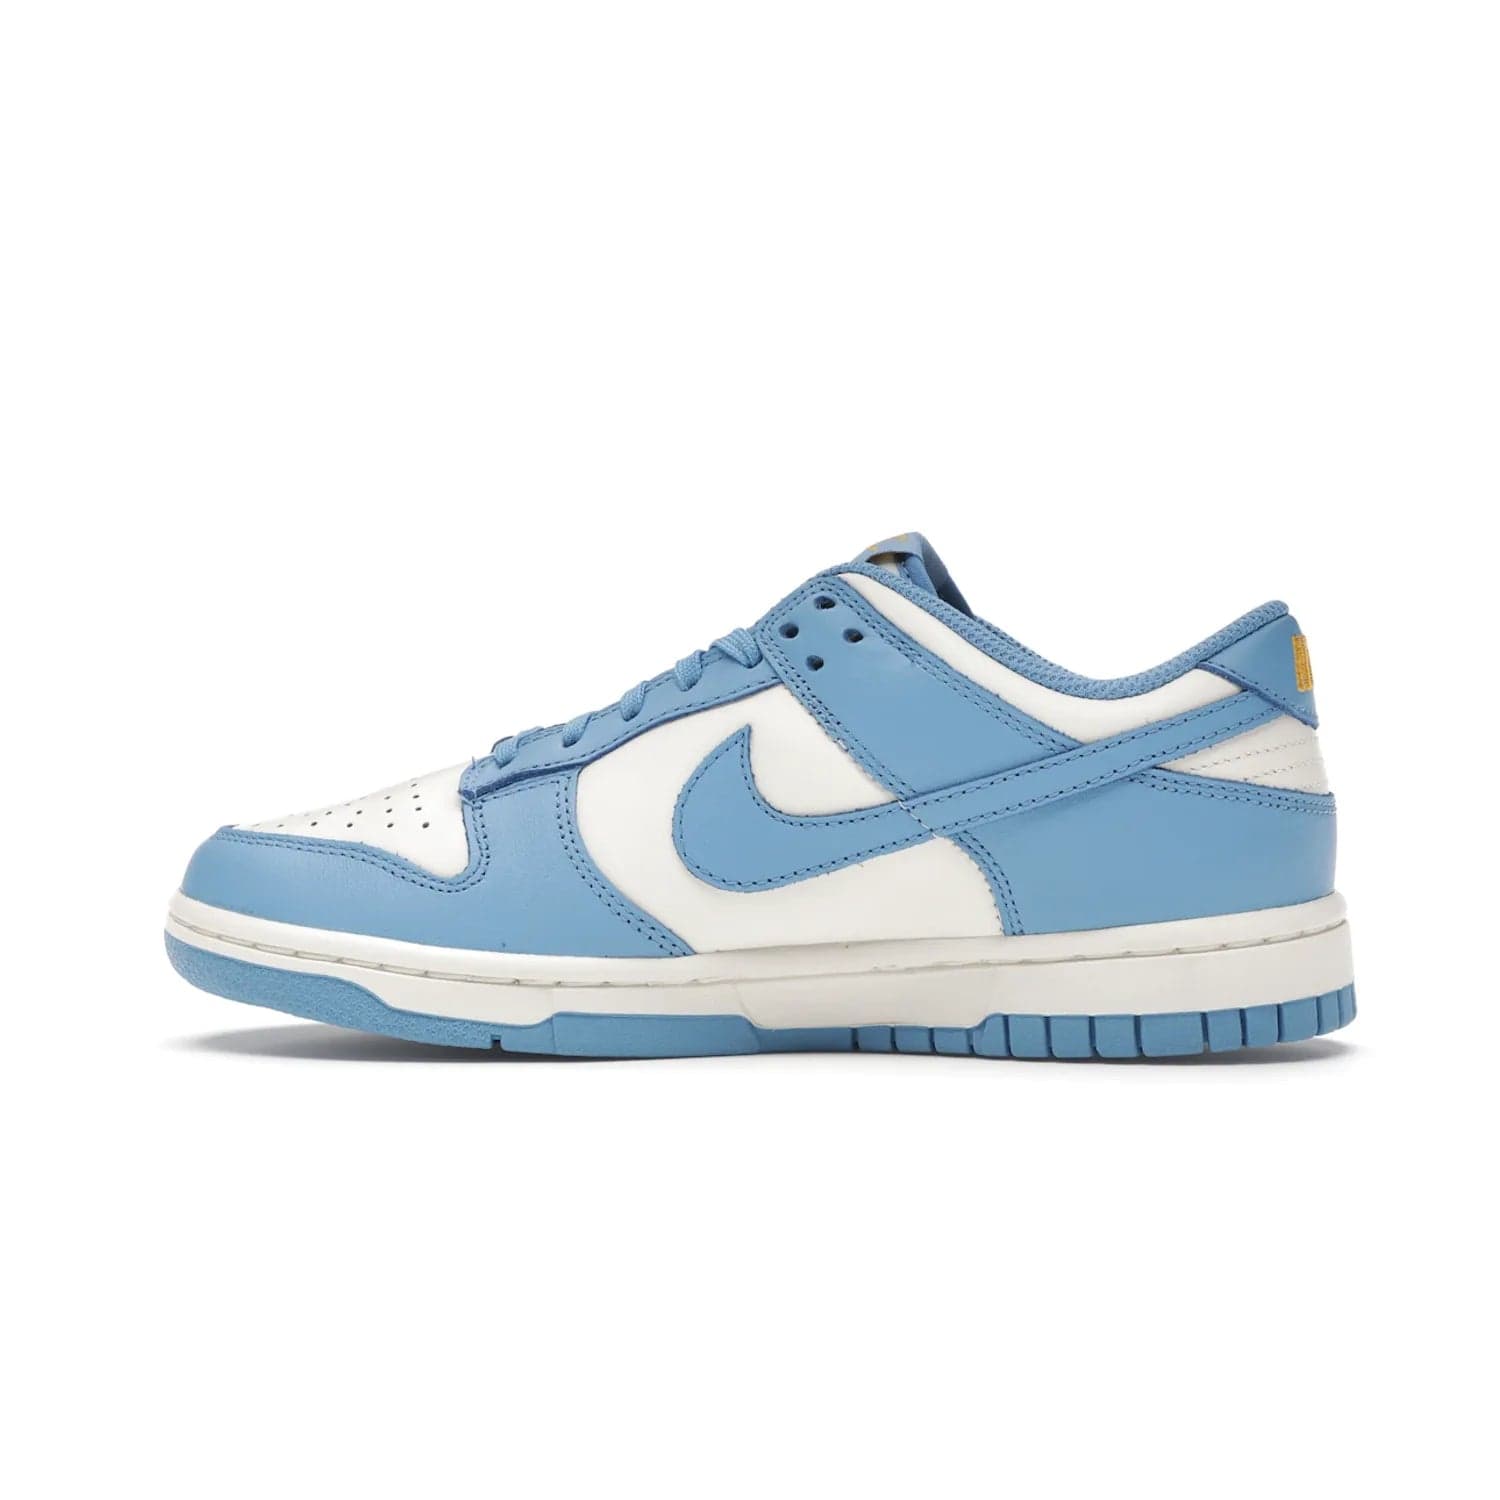 Nike Dunk Low Coast (Women's) - Image 20 - Only at www.BallersClubKickz.com - Iconic UCLA colors honor the west coast with the Nike Dunk Low Coast (Women's), a bold combo of light blue, white and yellow. Light leather upper with white midsole and light EVA outsole offer a modern twist. Released Feb 2021 for $100.